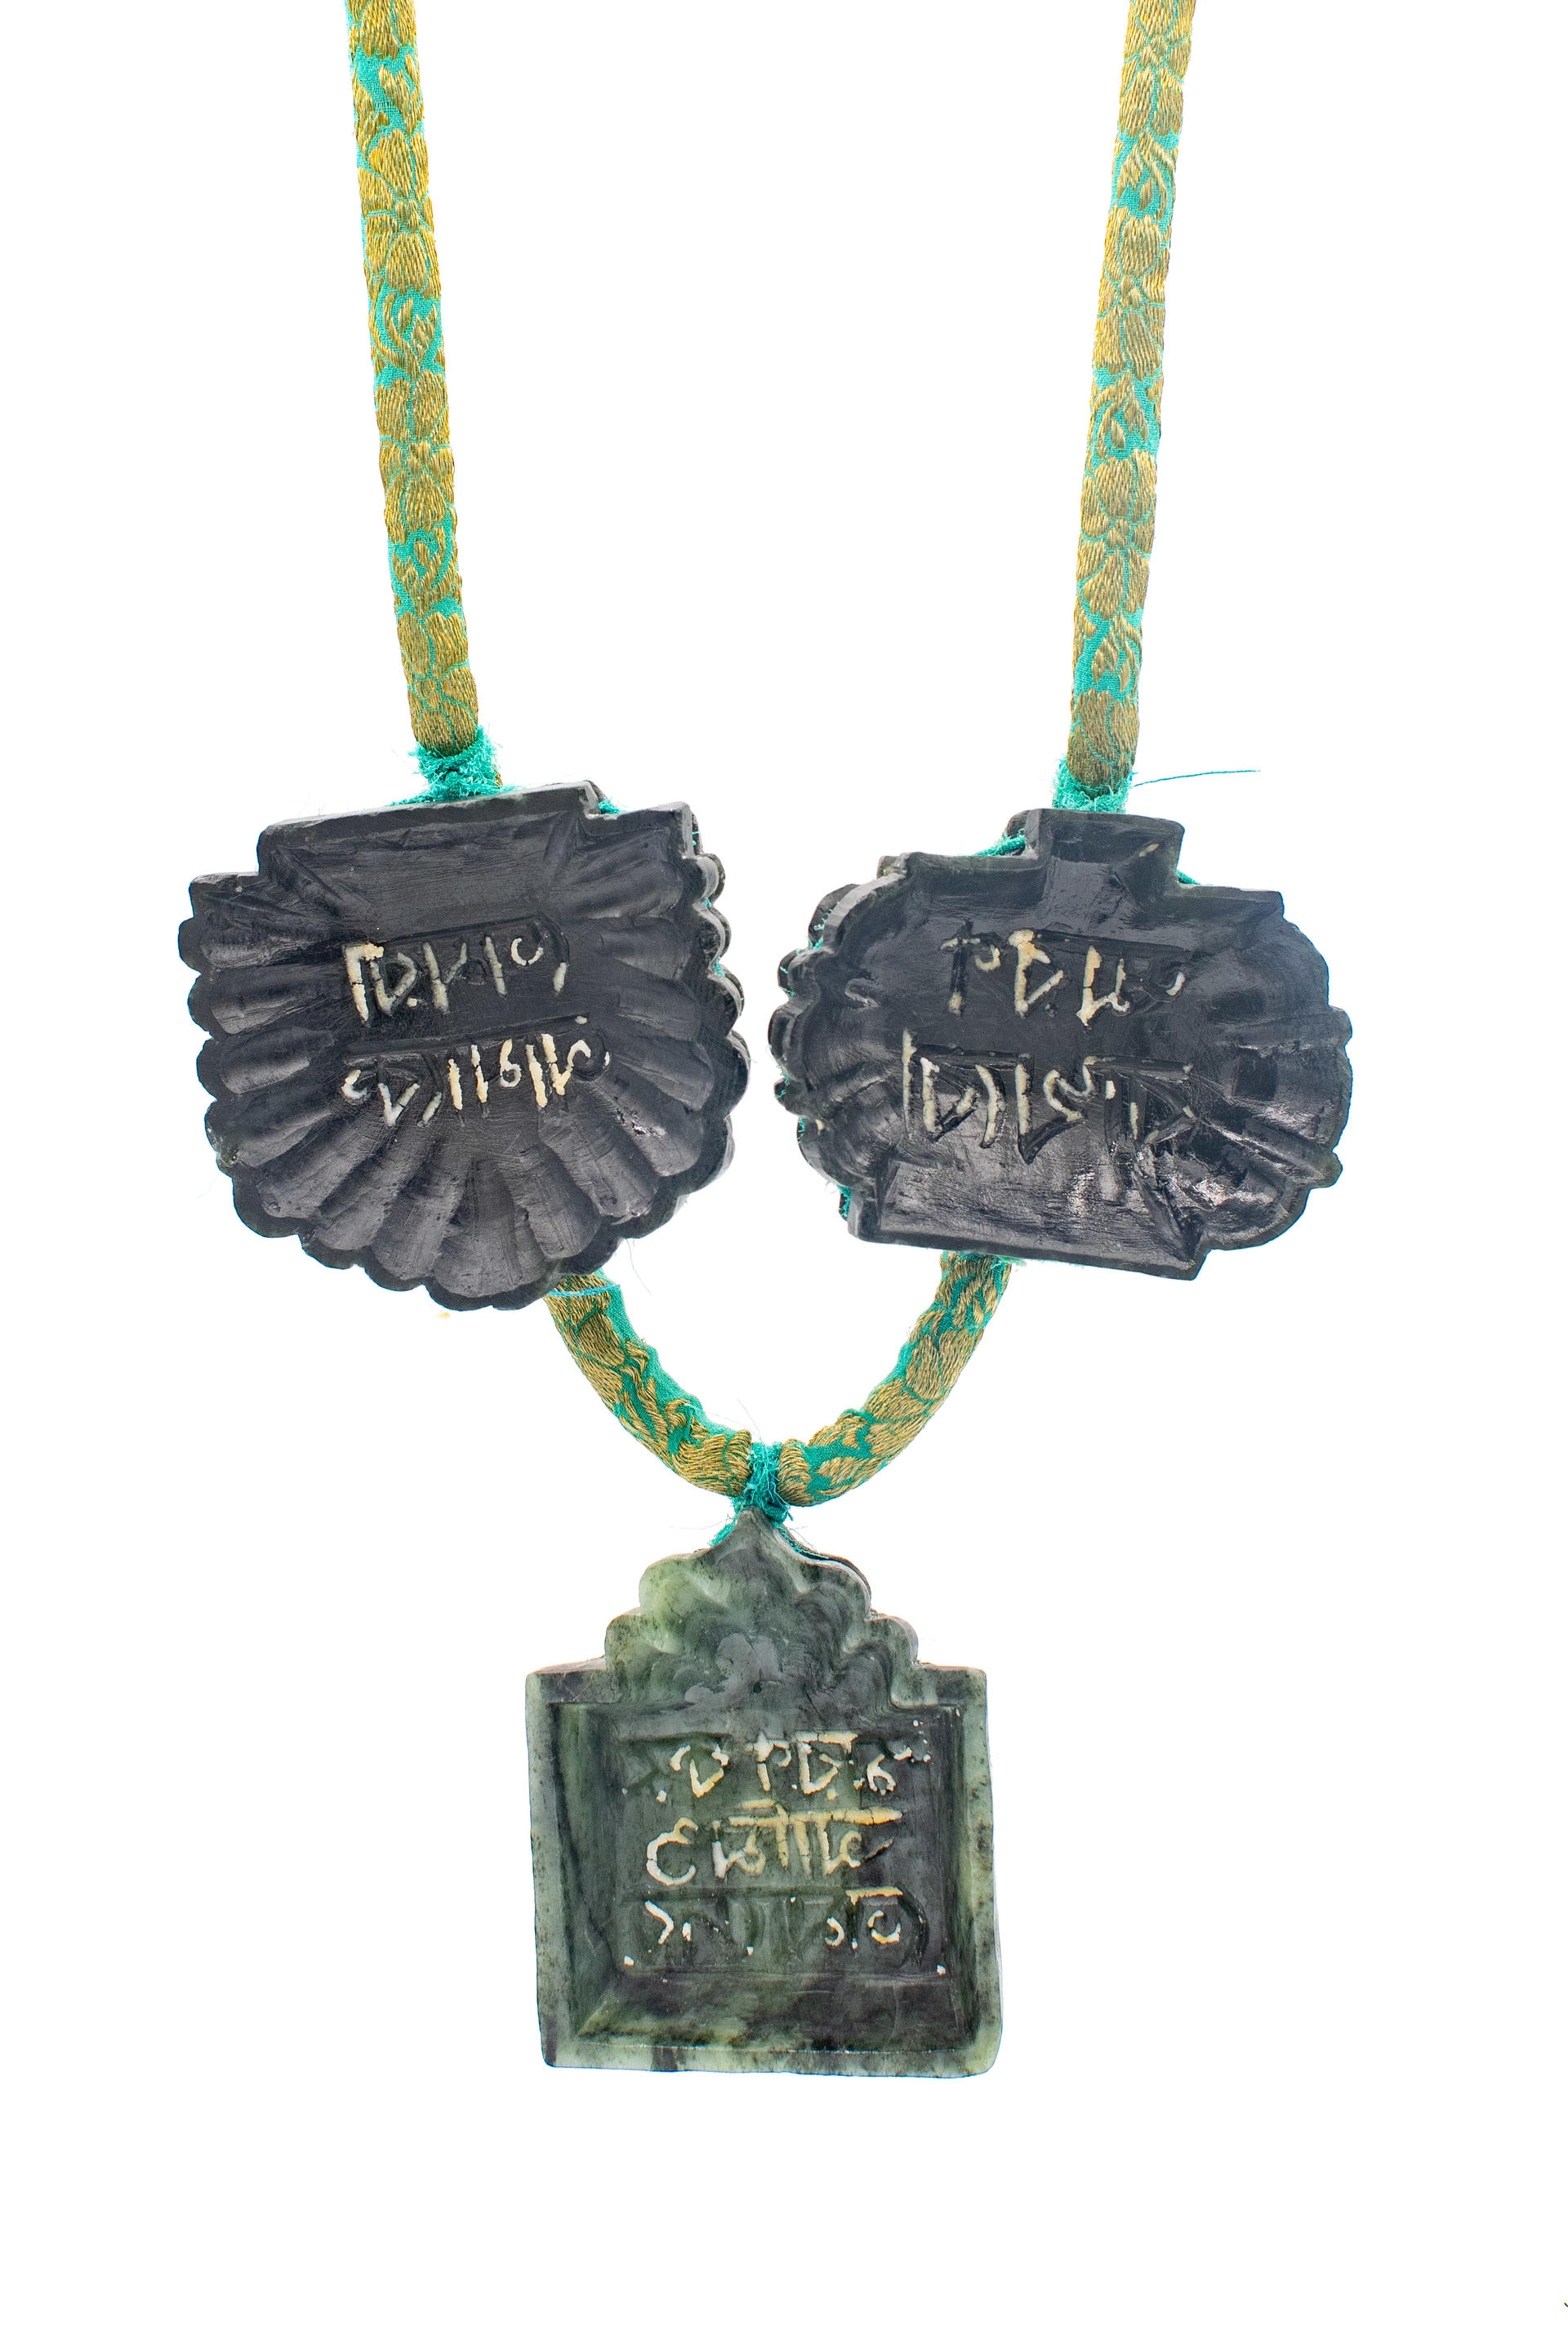 Detail of necklace with five soapstone molds carved with bangla script with shondesh residue.